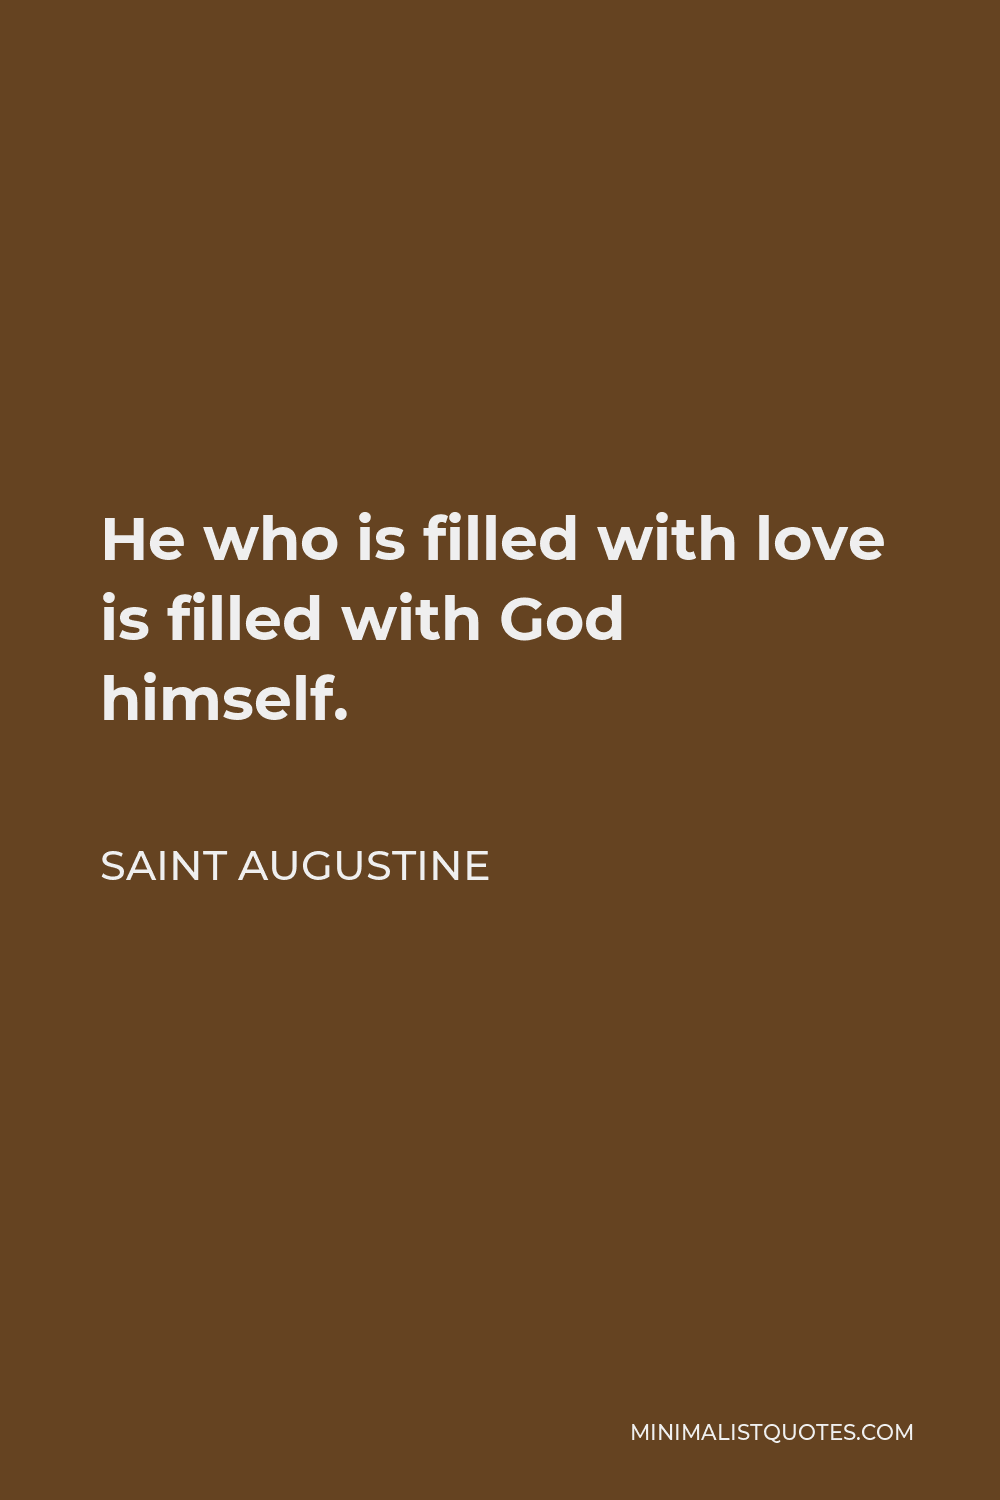 Saint Augustine Quote - He who is filled with love is filled with God himself.